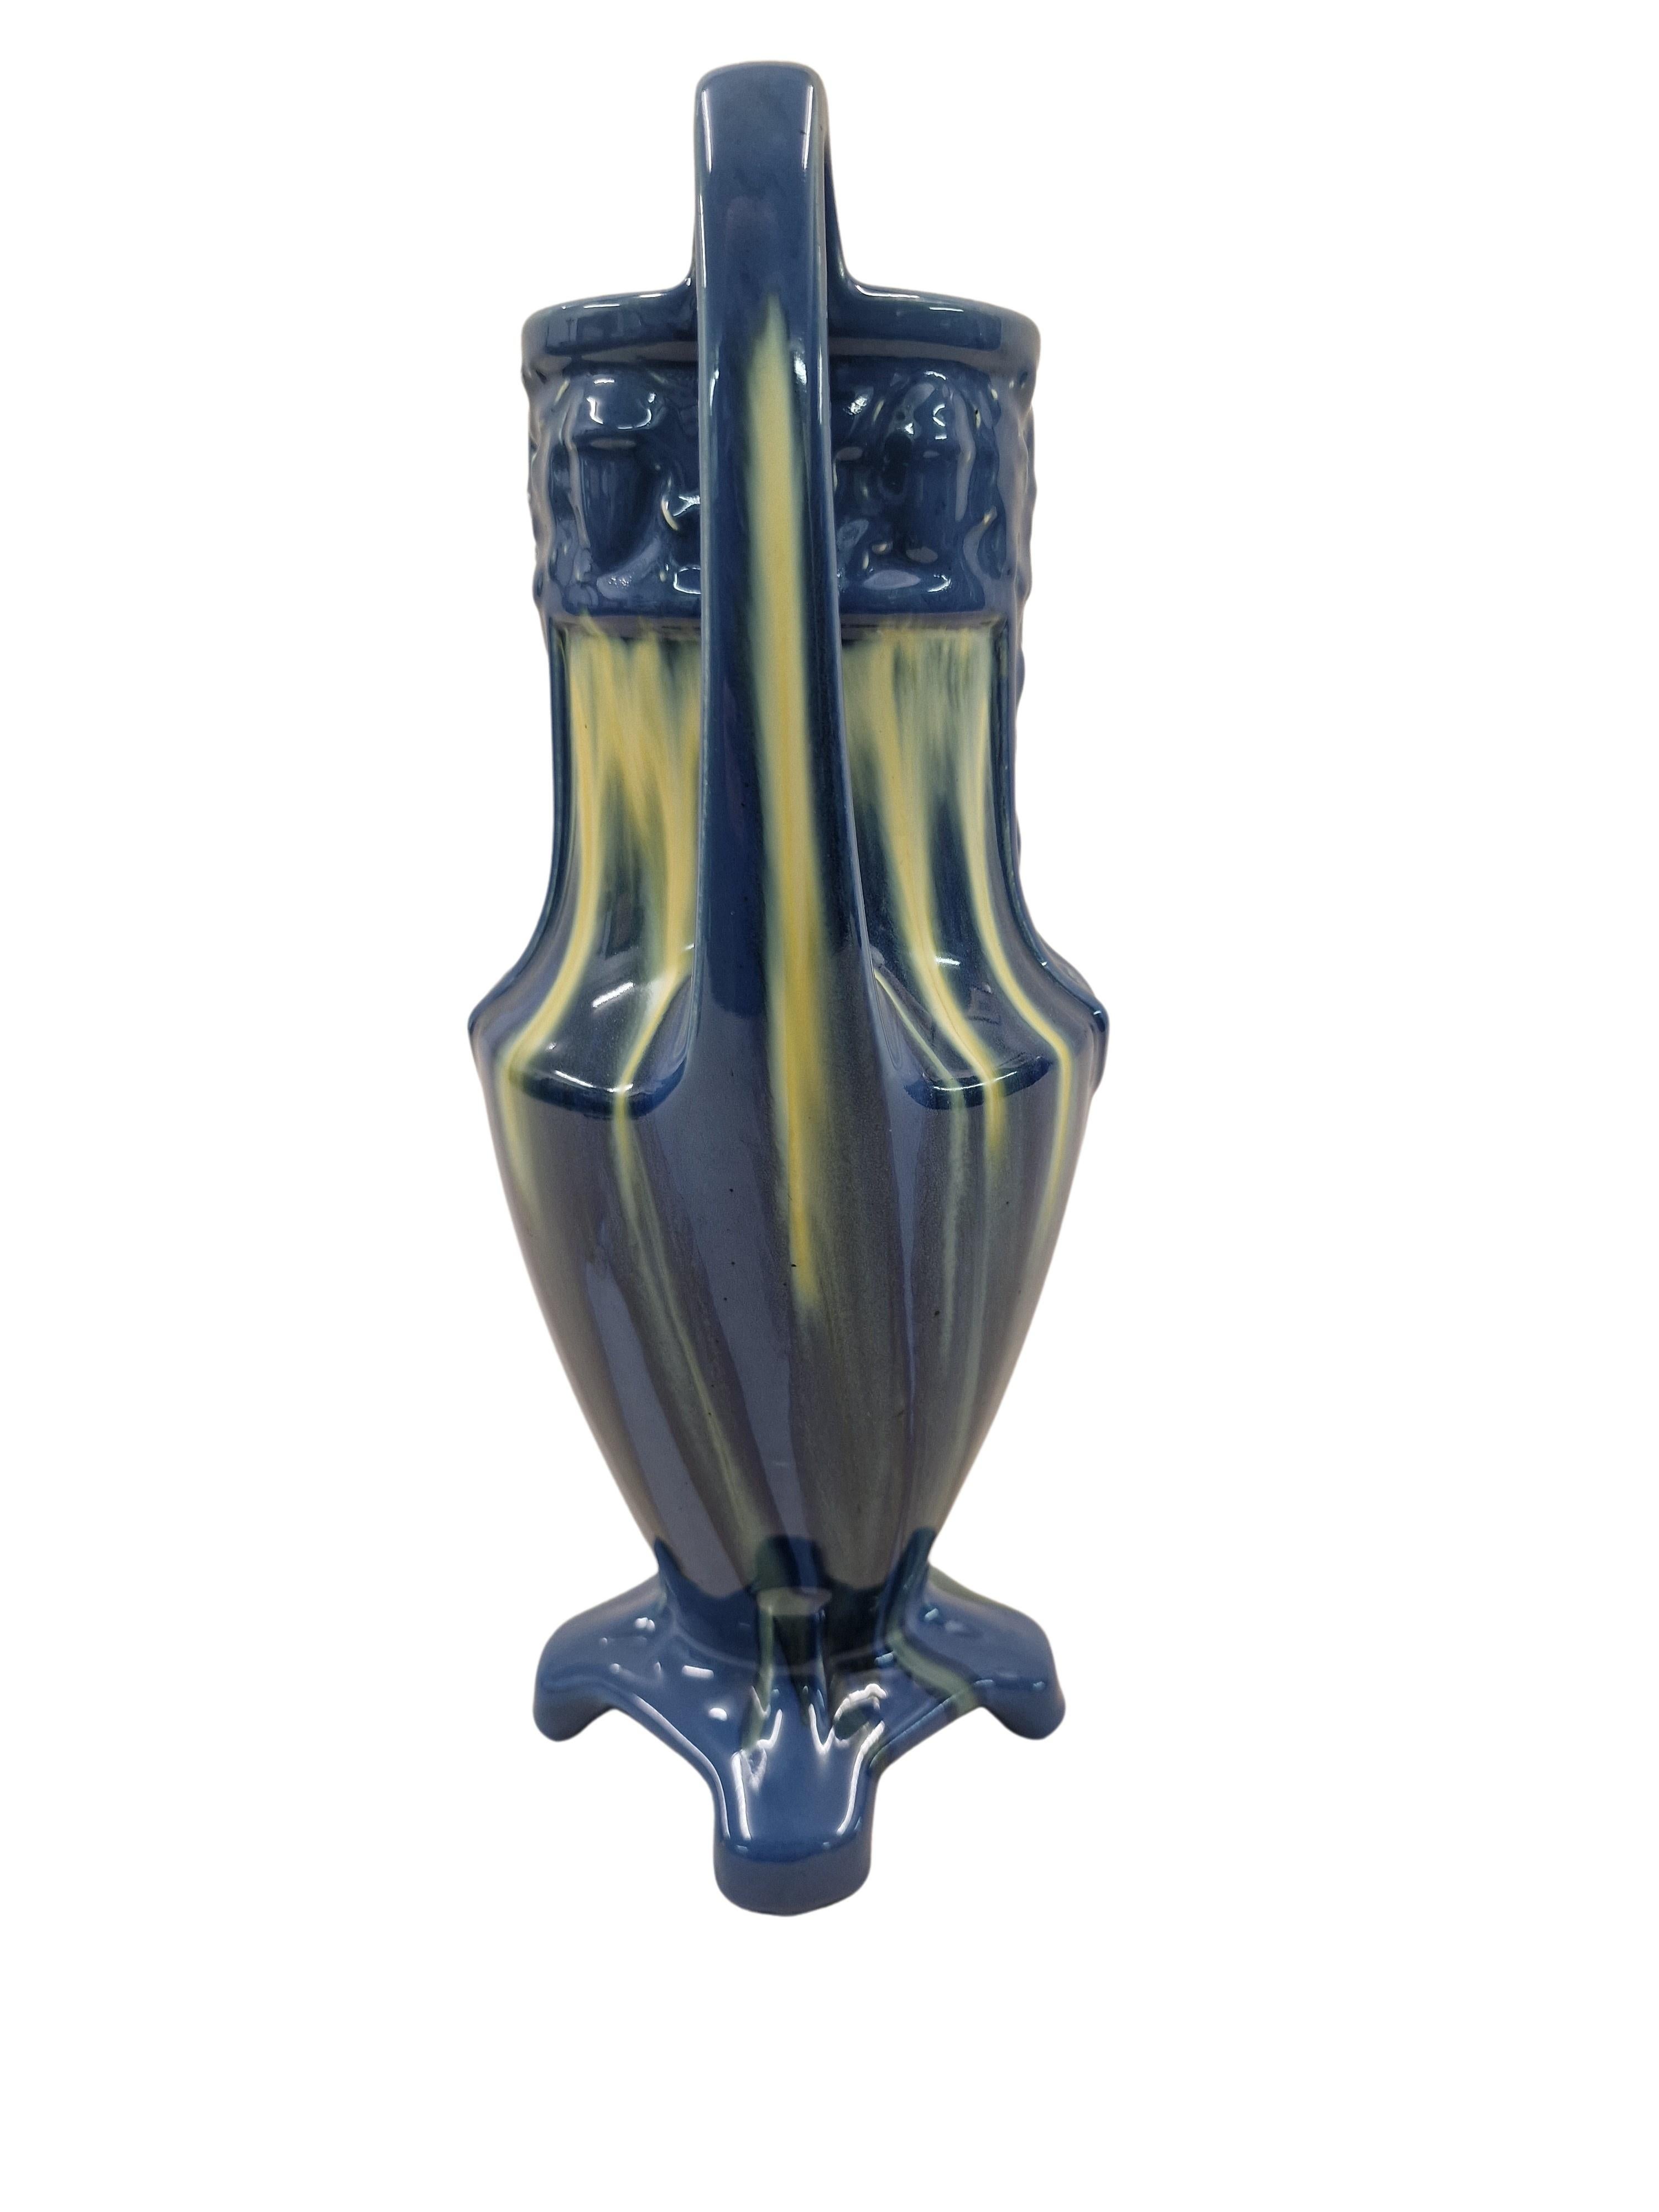 Very decorative vase from the early art deco period, made in France. 

This object has a shape that looks like the ancient Greek amphorae, but has a four-pass stand to ensure stability, in the upper area there are two handles on the sides.